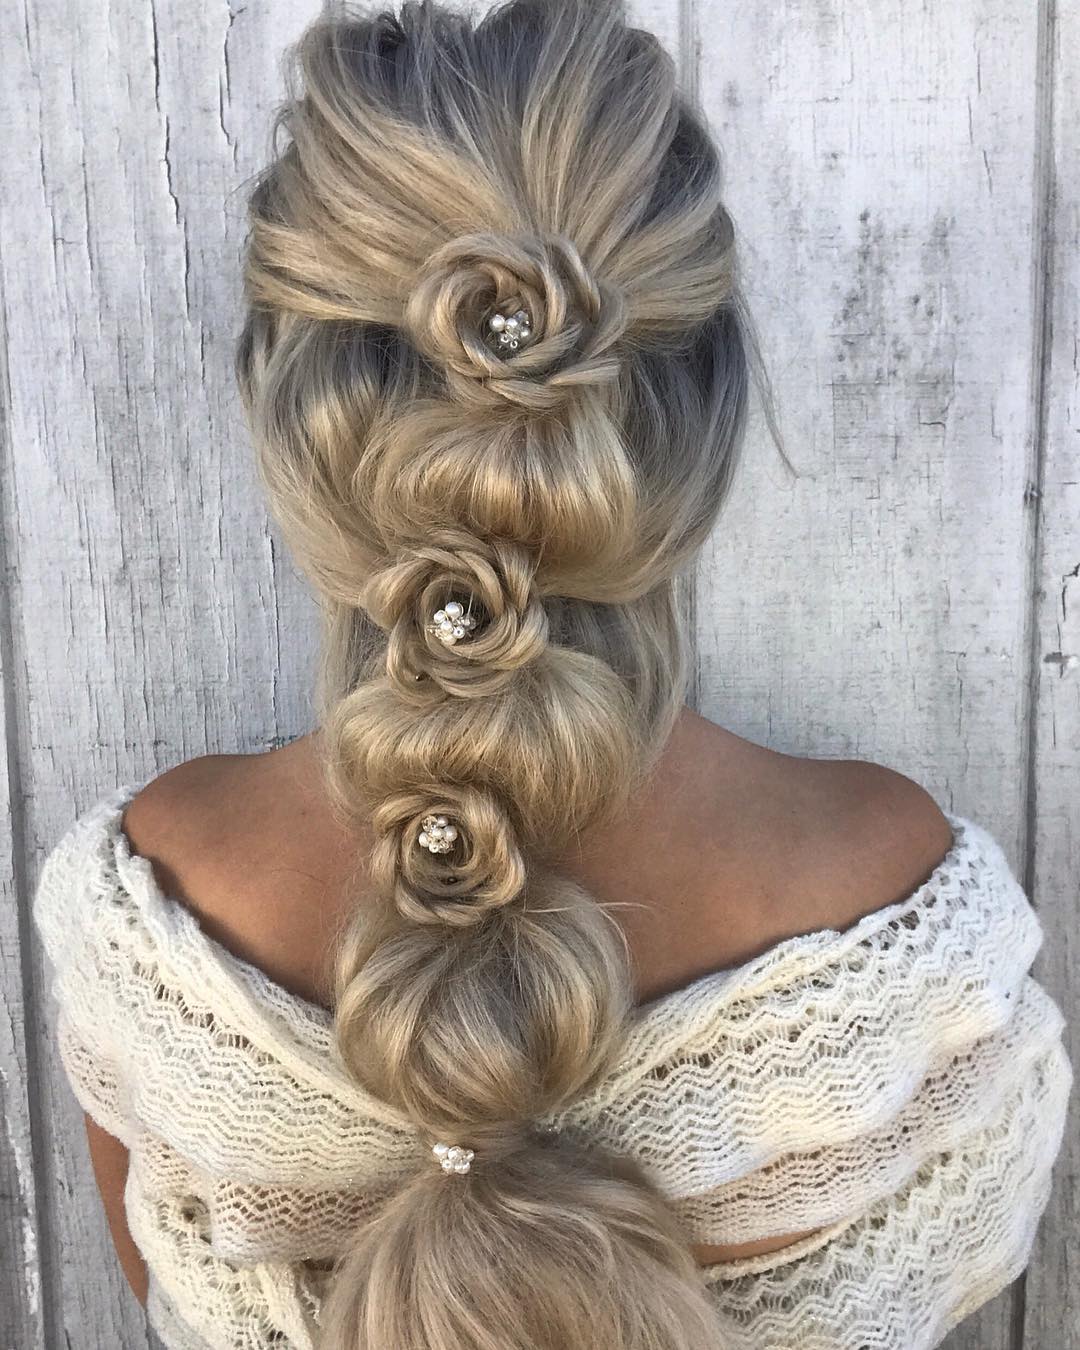 Bubble Braid Hairstyle 